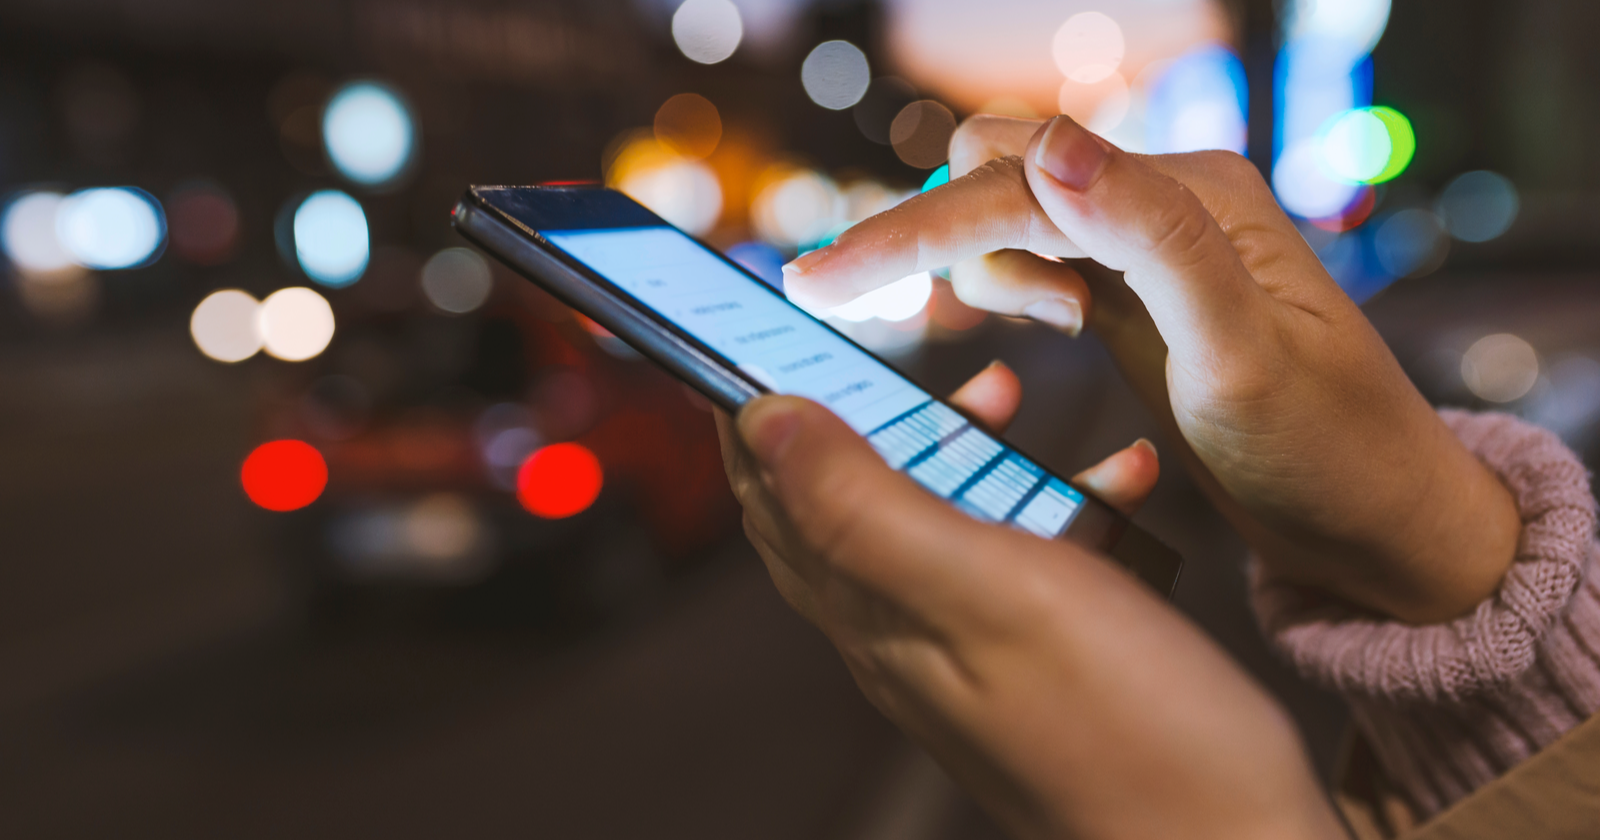 14 Mobile Optimization Best Practices You Need To Know via @sejournal, @BrianHarnish